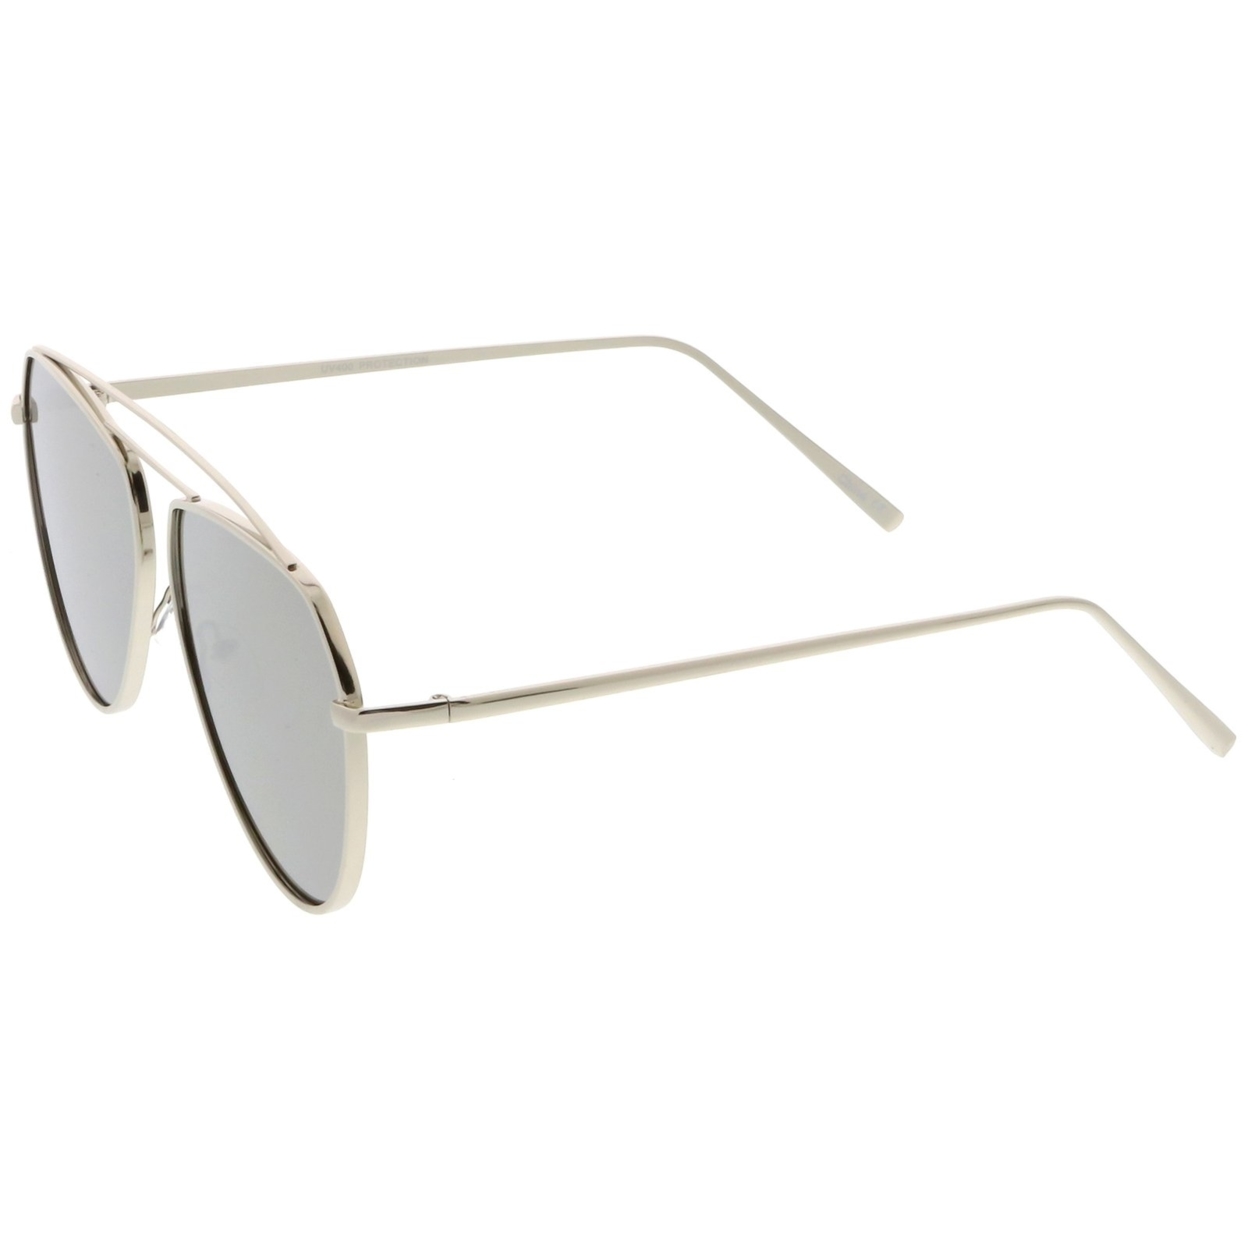 Oversize Metal Aviator Sunglasses Curved Crossbar Colored Mirror Flat Lens 59mm - Silver / Blue Mirror